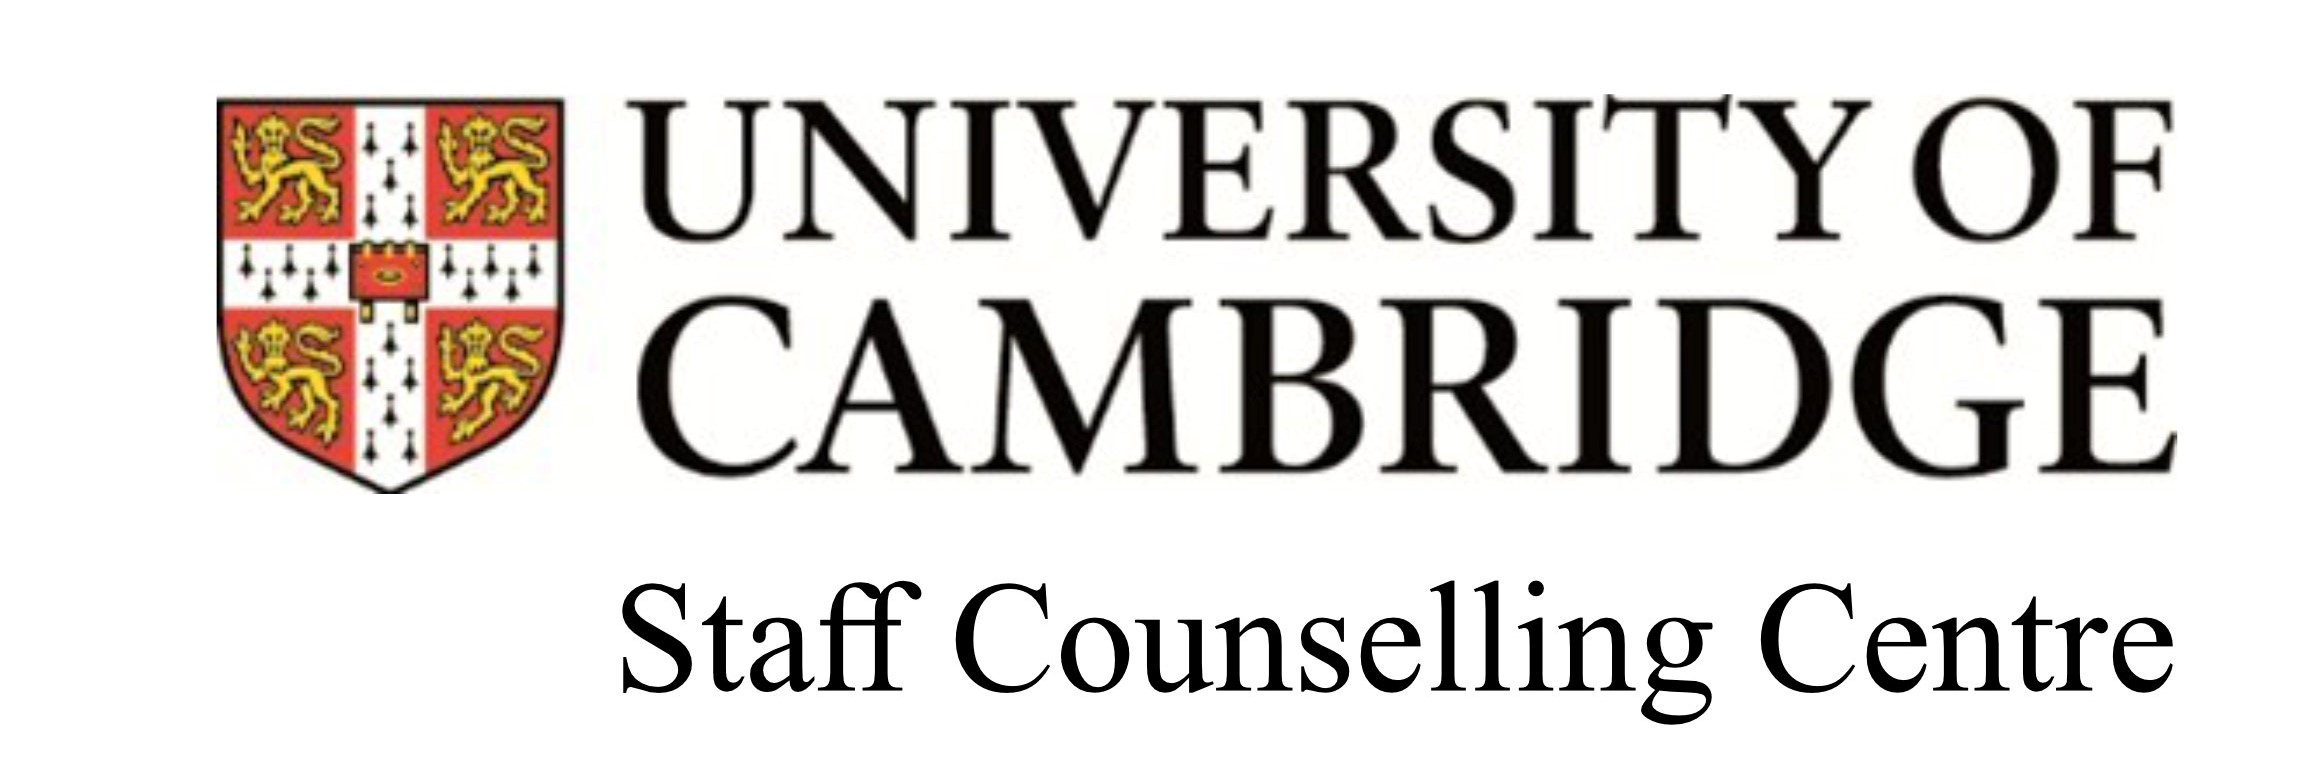 University of Cambridge, Staff Counselling Centre